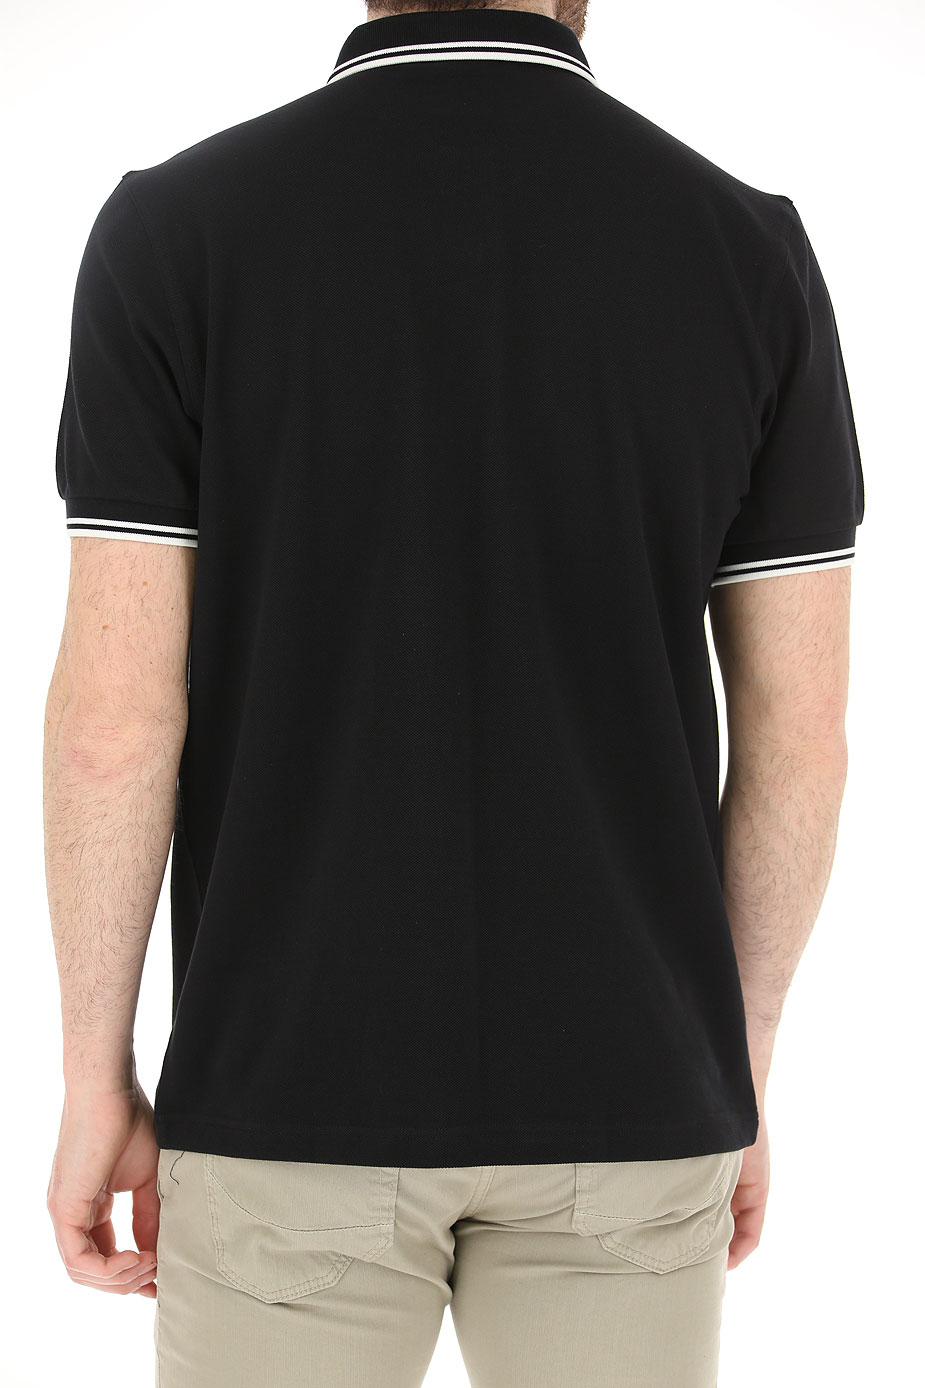 Mens Clothing Fred Perry, Style code: m3600-524-